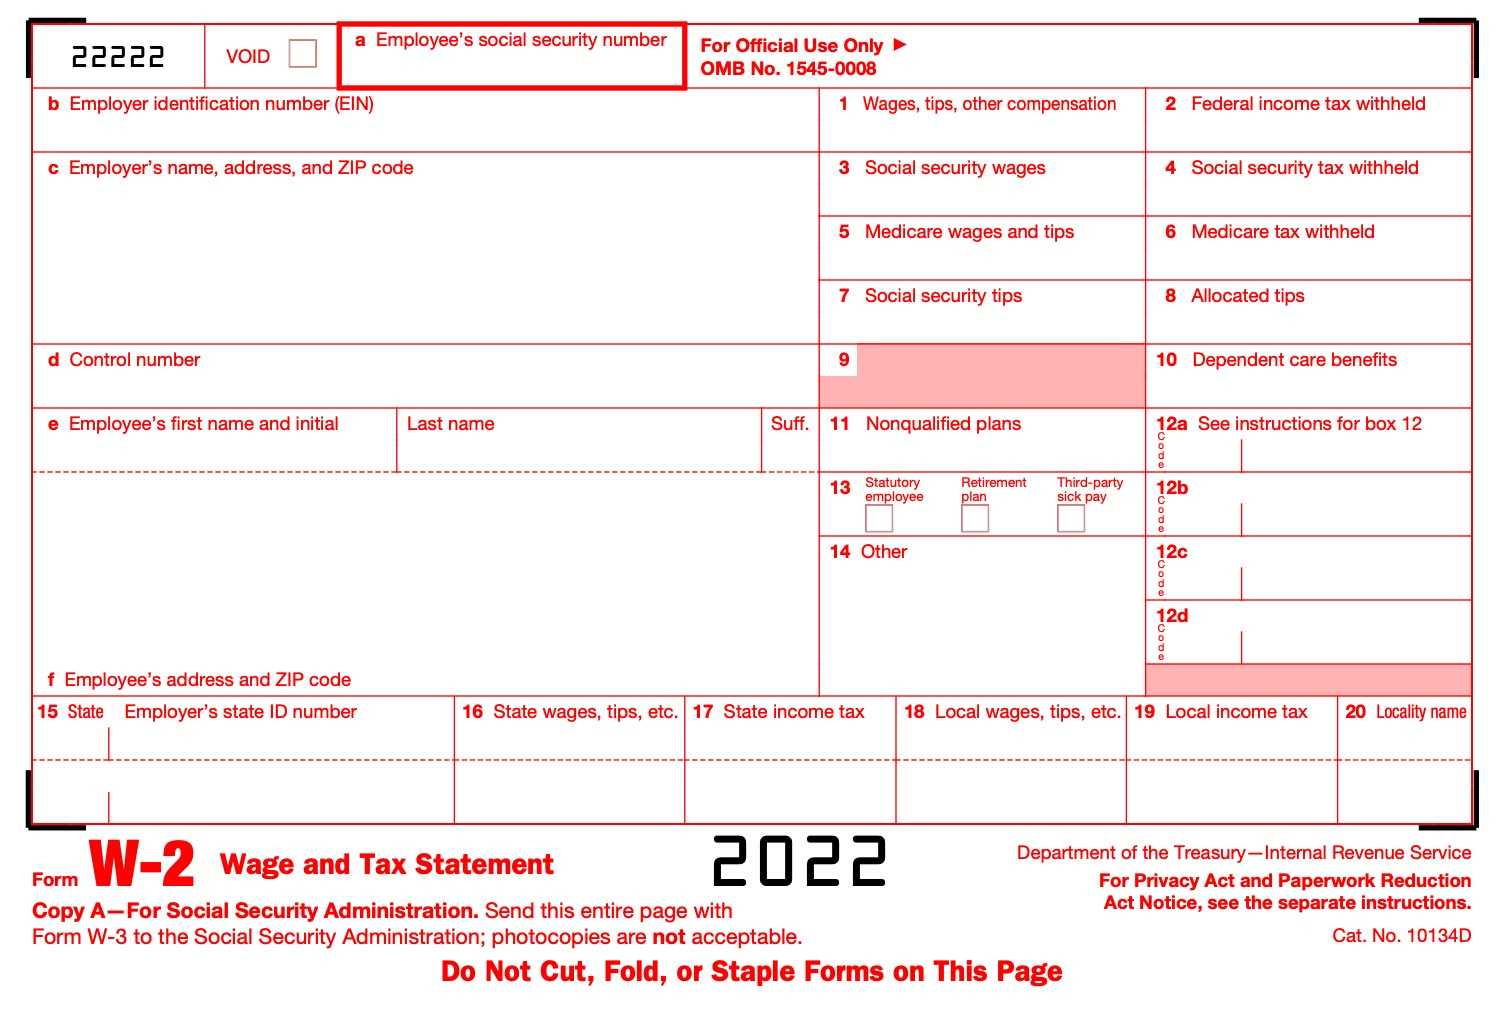 What Is Irs Form W-2? regarding When Should W2 Forms Arrive 2022